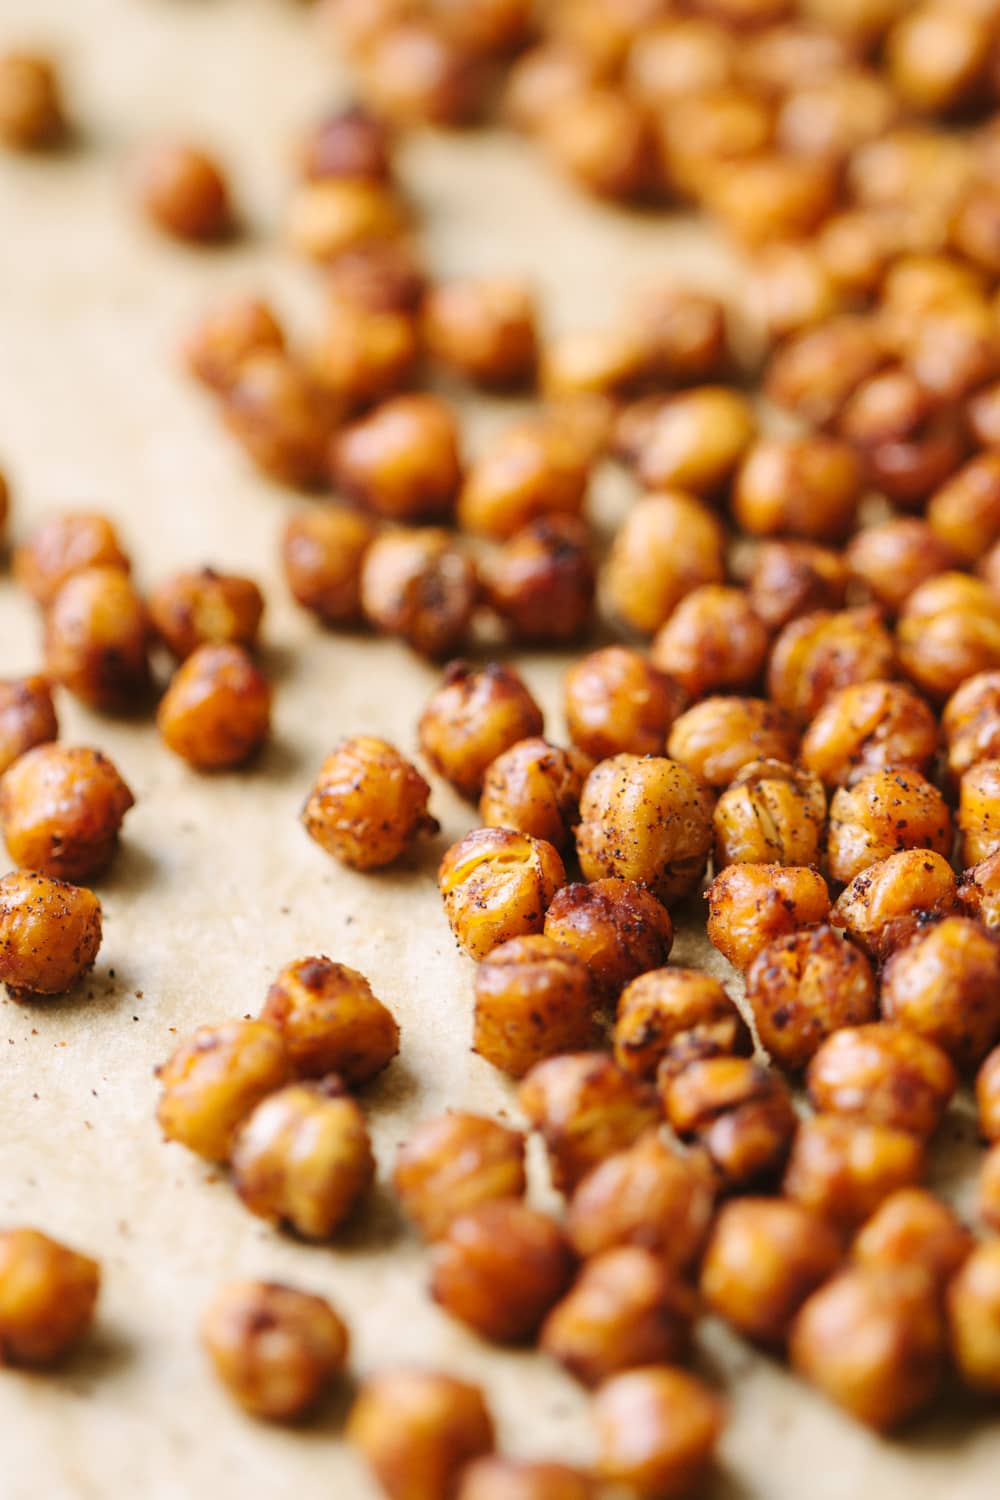 spicy chipotle roasted chickpeas on a baking sheet fresh from the oven